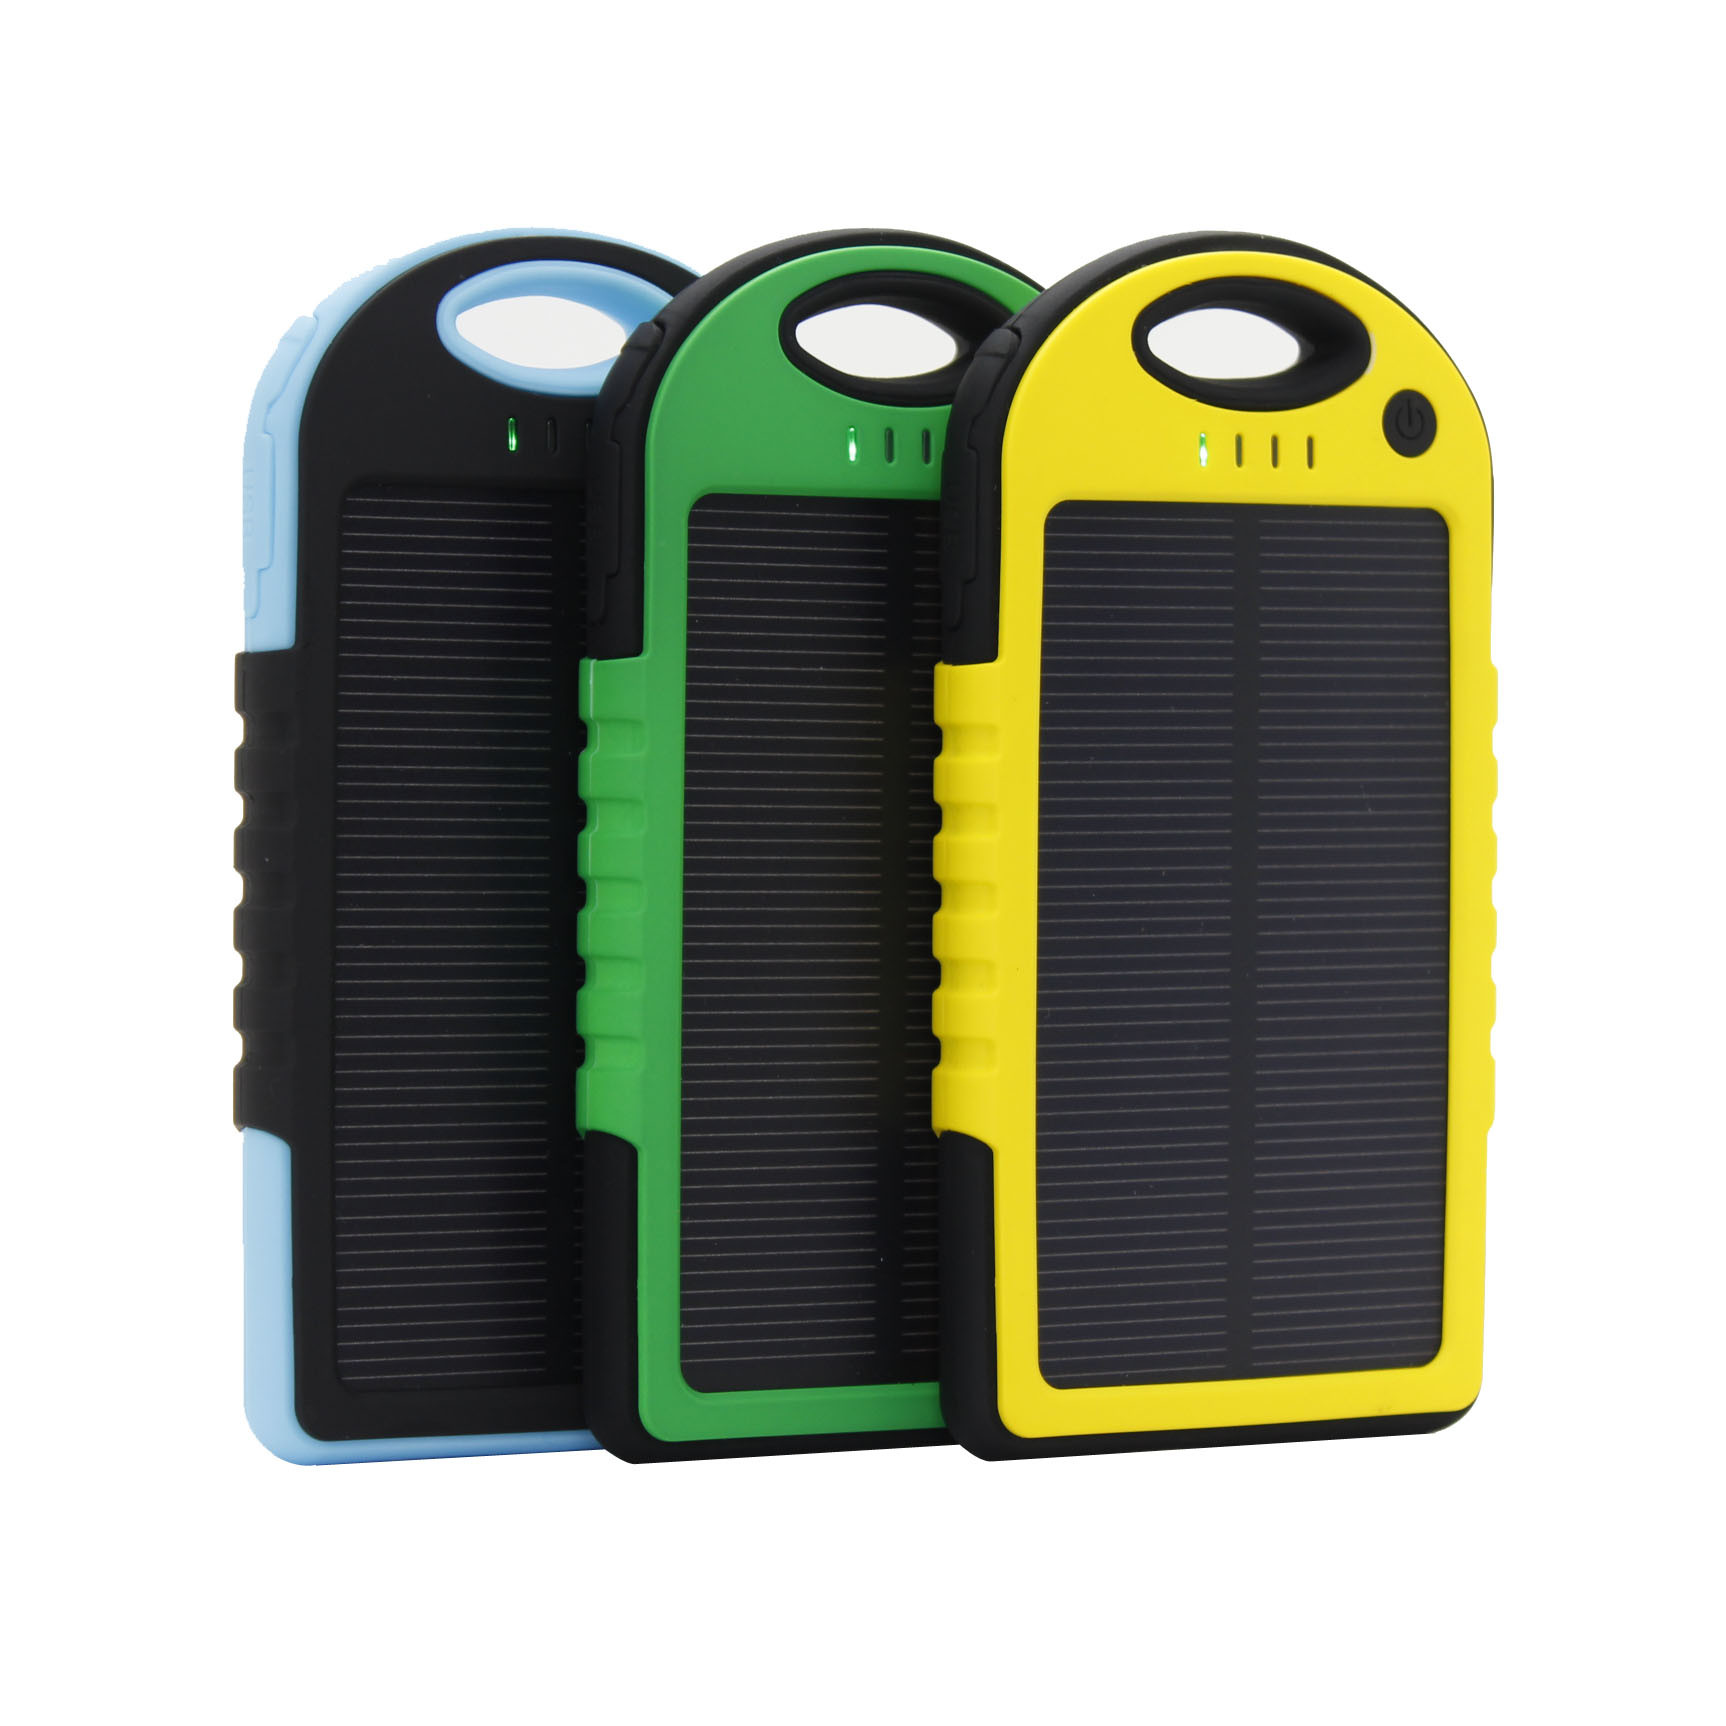 China Gold Supplier 5000mAh Promotion Slim Charger Solar Power Bank